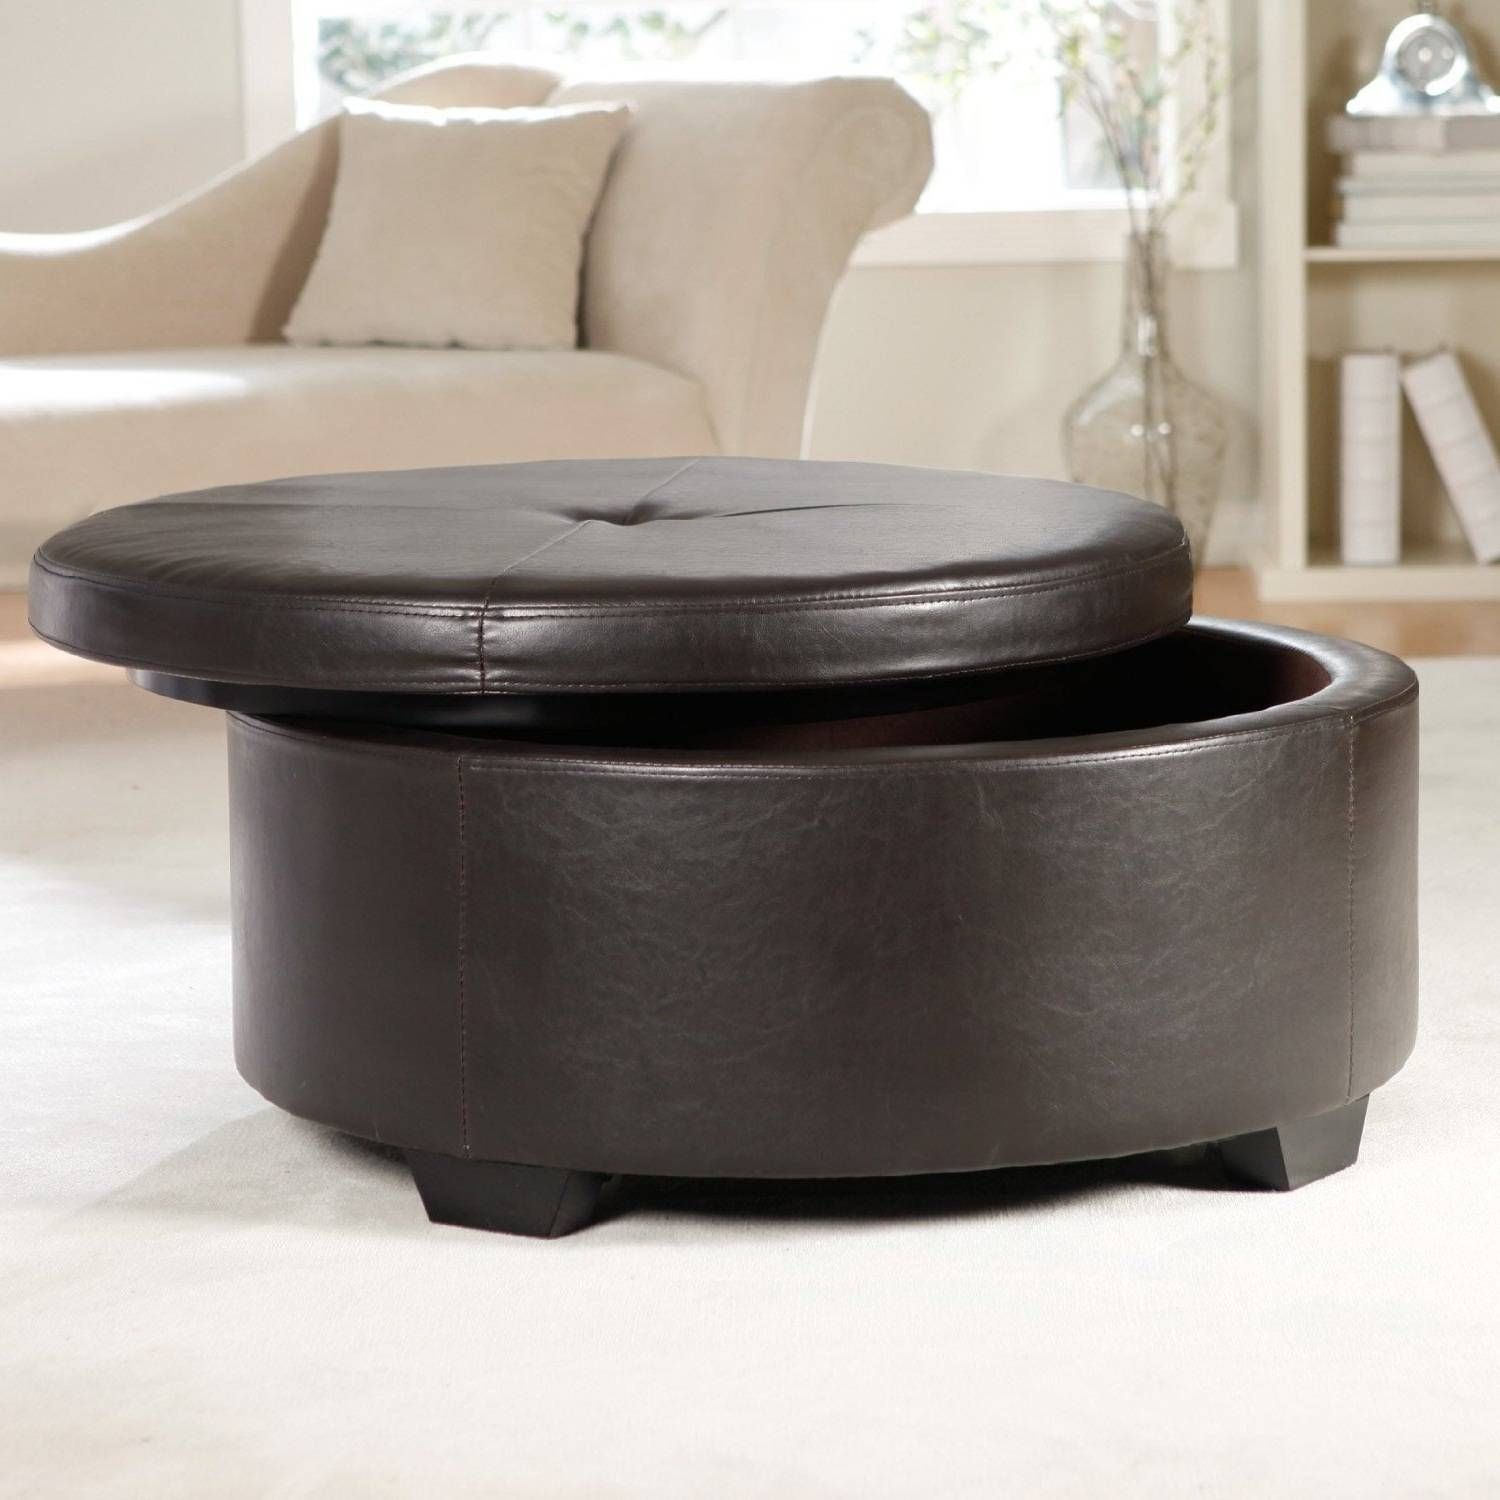 Coffee Table: Outstanding Round Storage Coffee Table Designs Small Inside Round Coffee Table Storages (View 4 of 30)